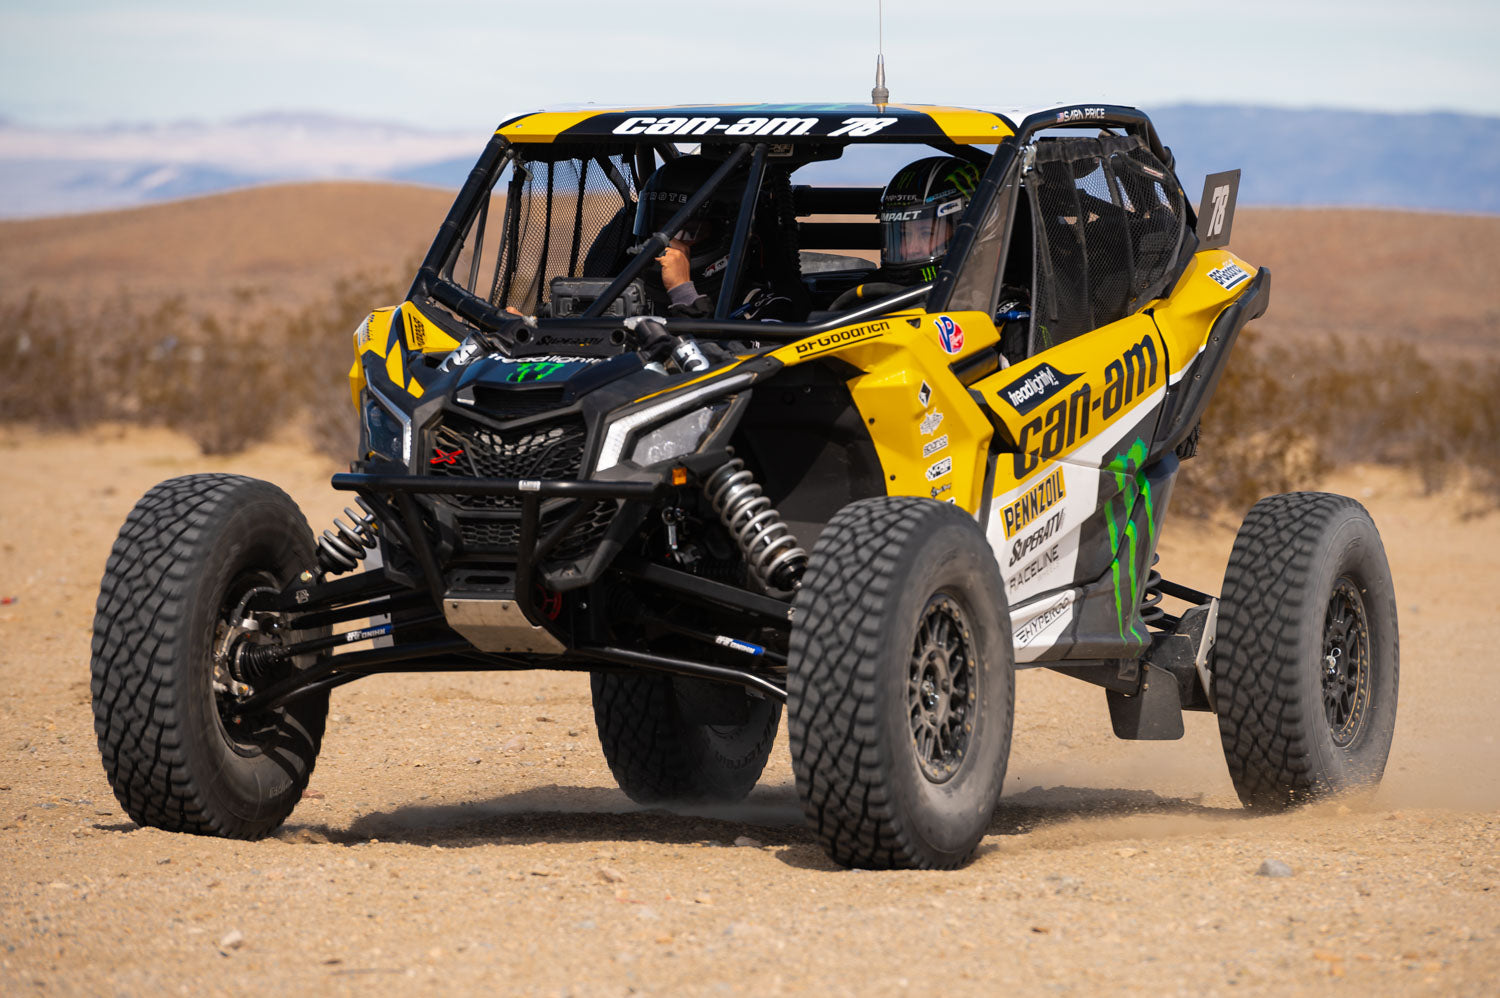 New Can Am Off Road Maverick, Testing with Sara Price in preparation for the Dakar Rally